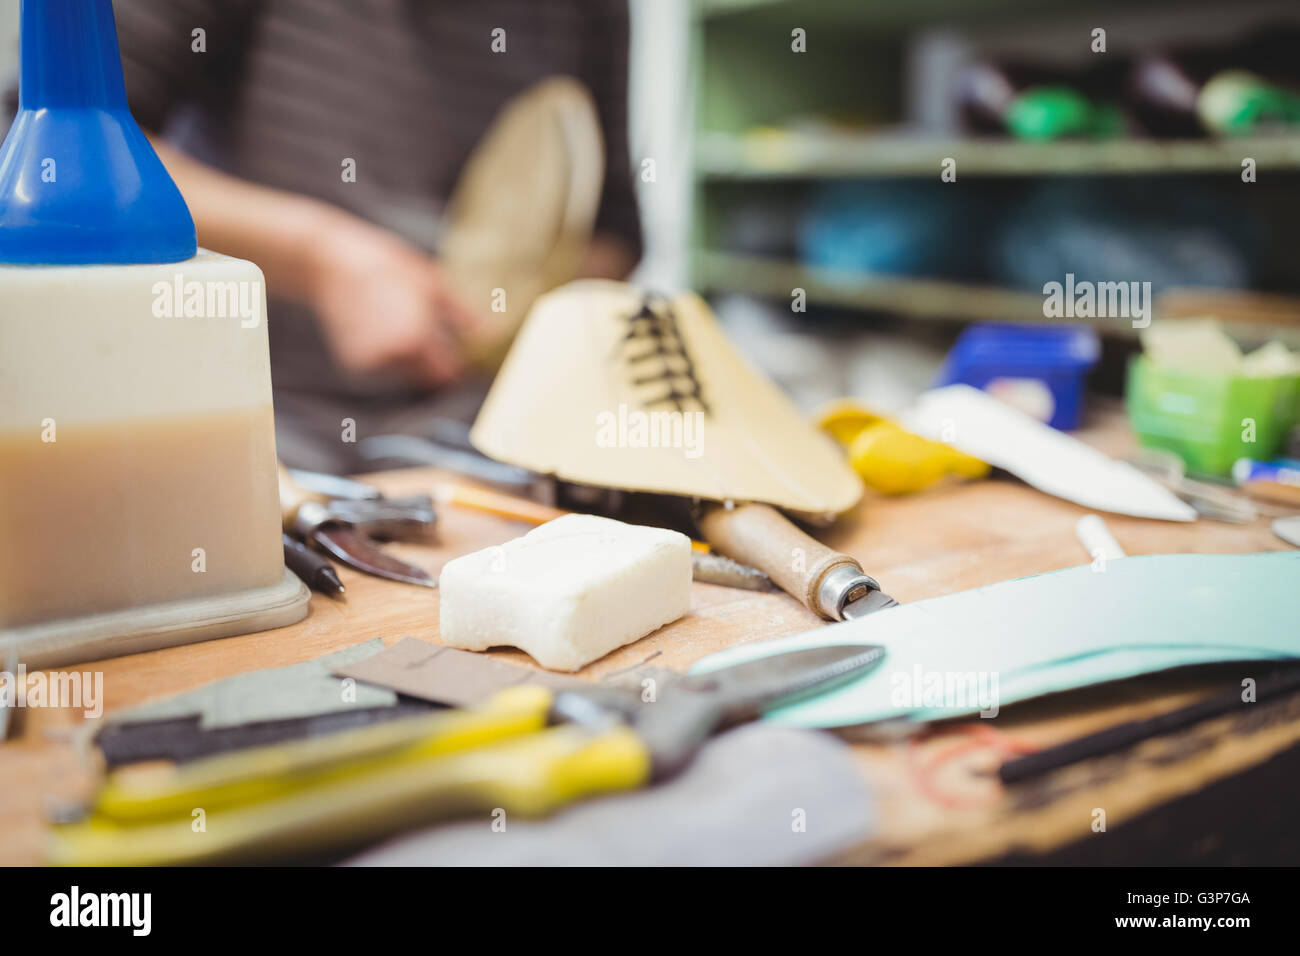 Shoe and tools in table Stock Photo